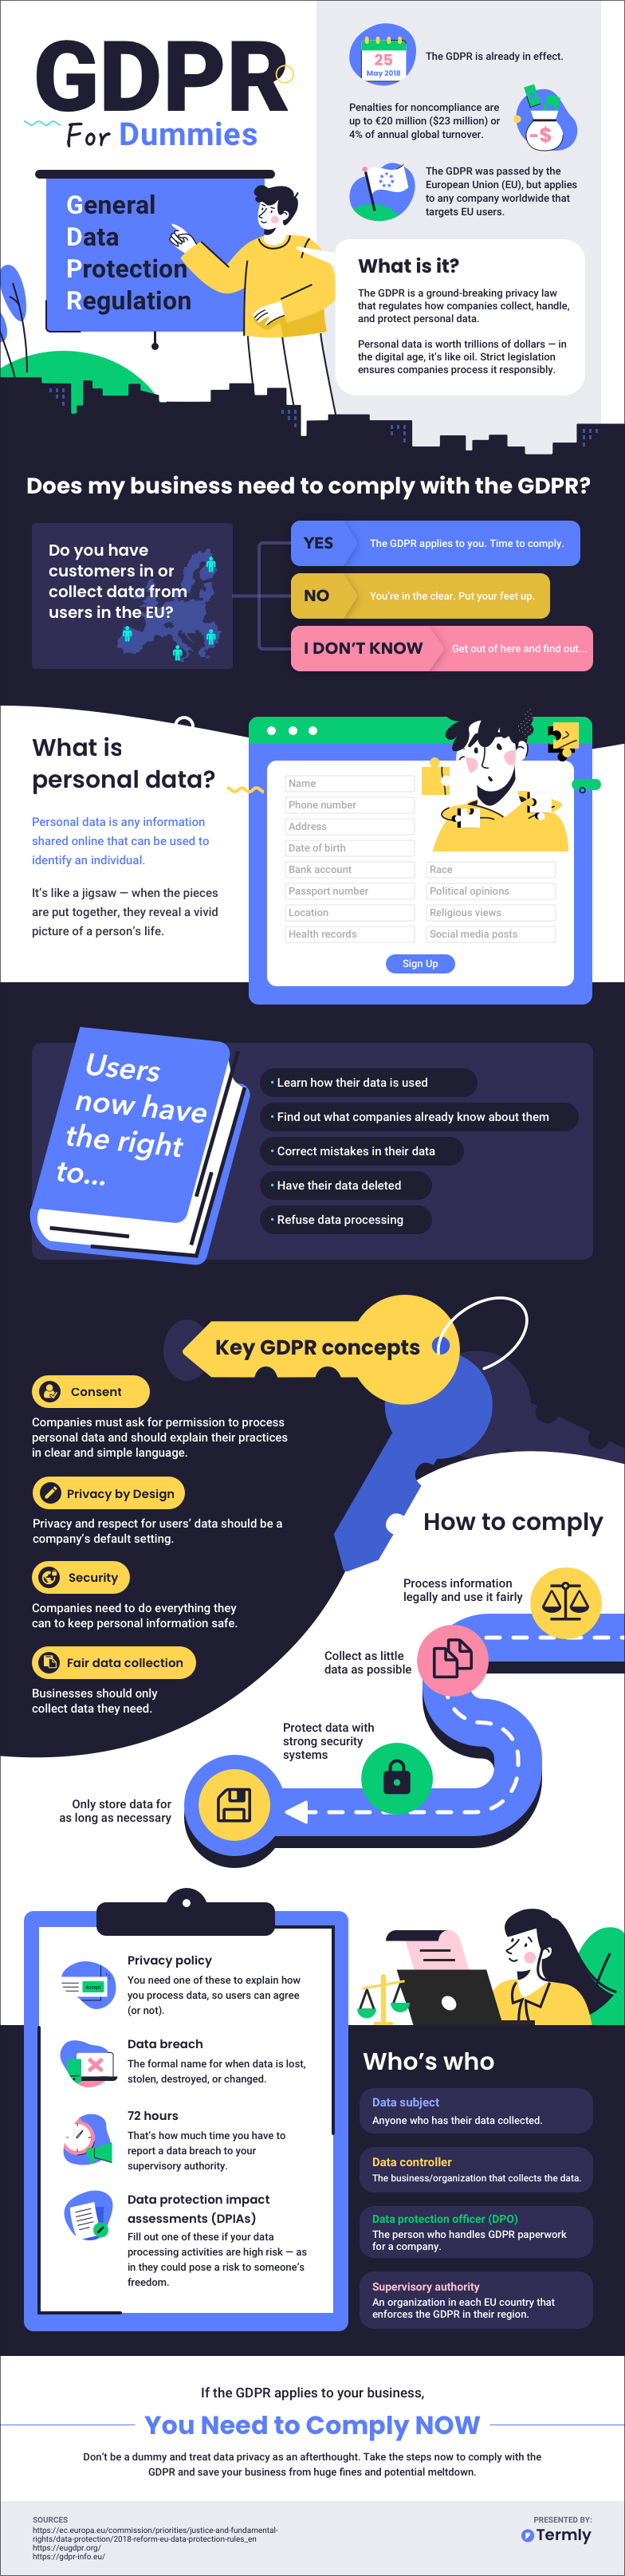 GDPR for dummies: beginner's guide to GDPR infographic